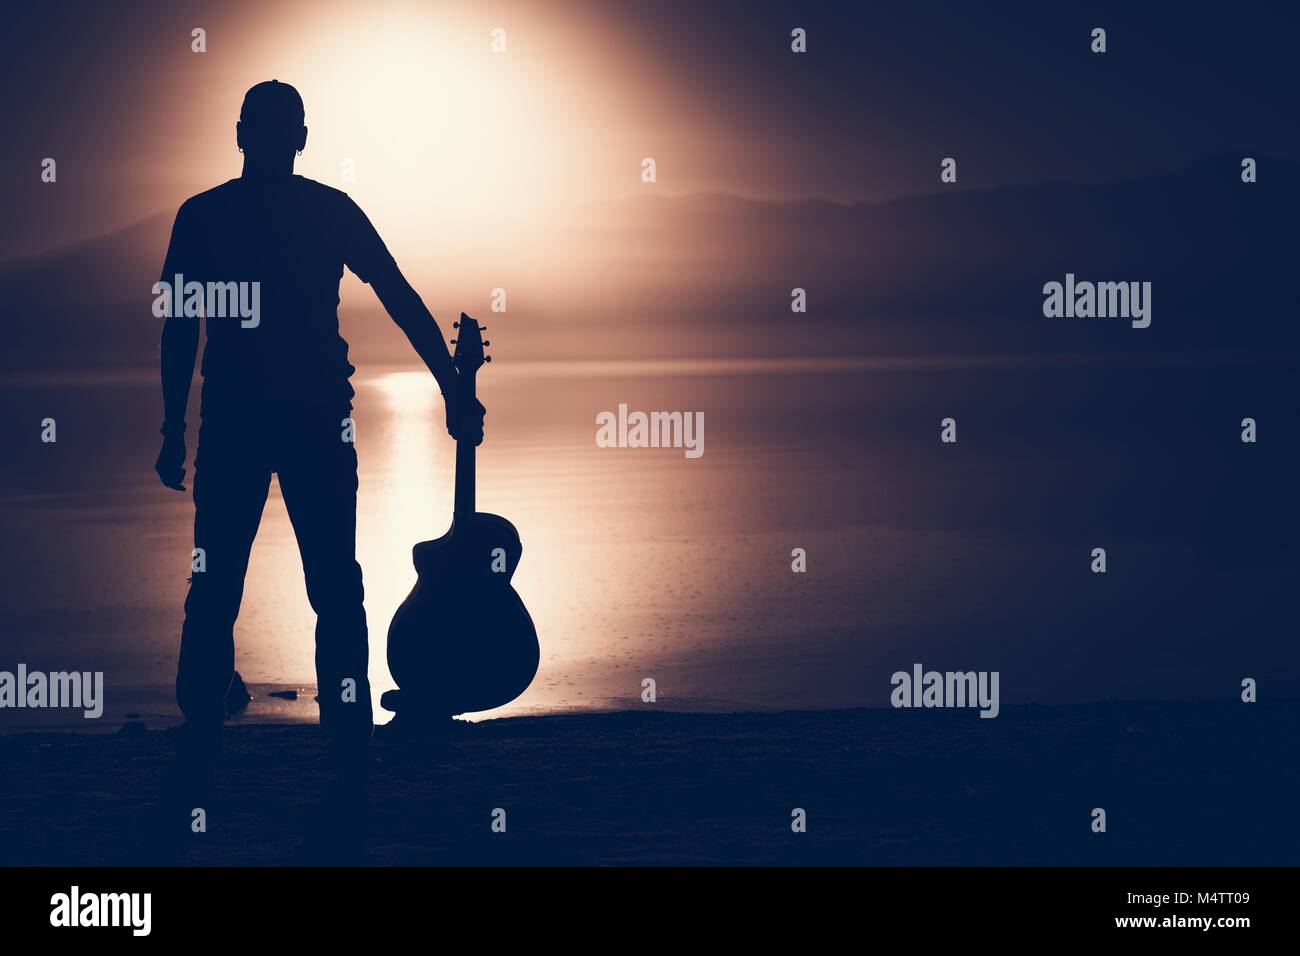 Guitarist with Acoustic Guitar Sunset Silhouette Concept Photo with Right Side Copy Space. Stock Photo